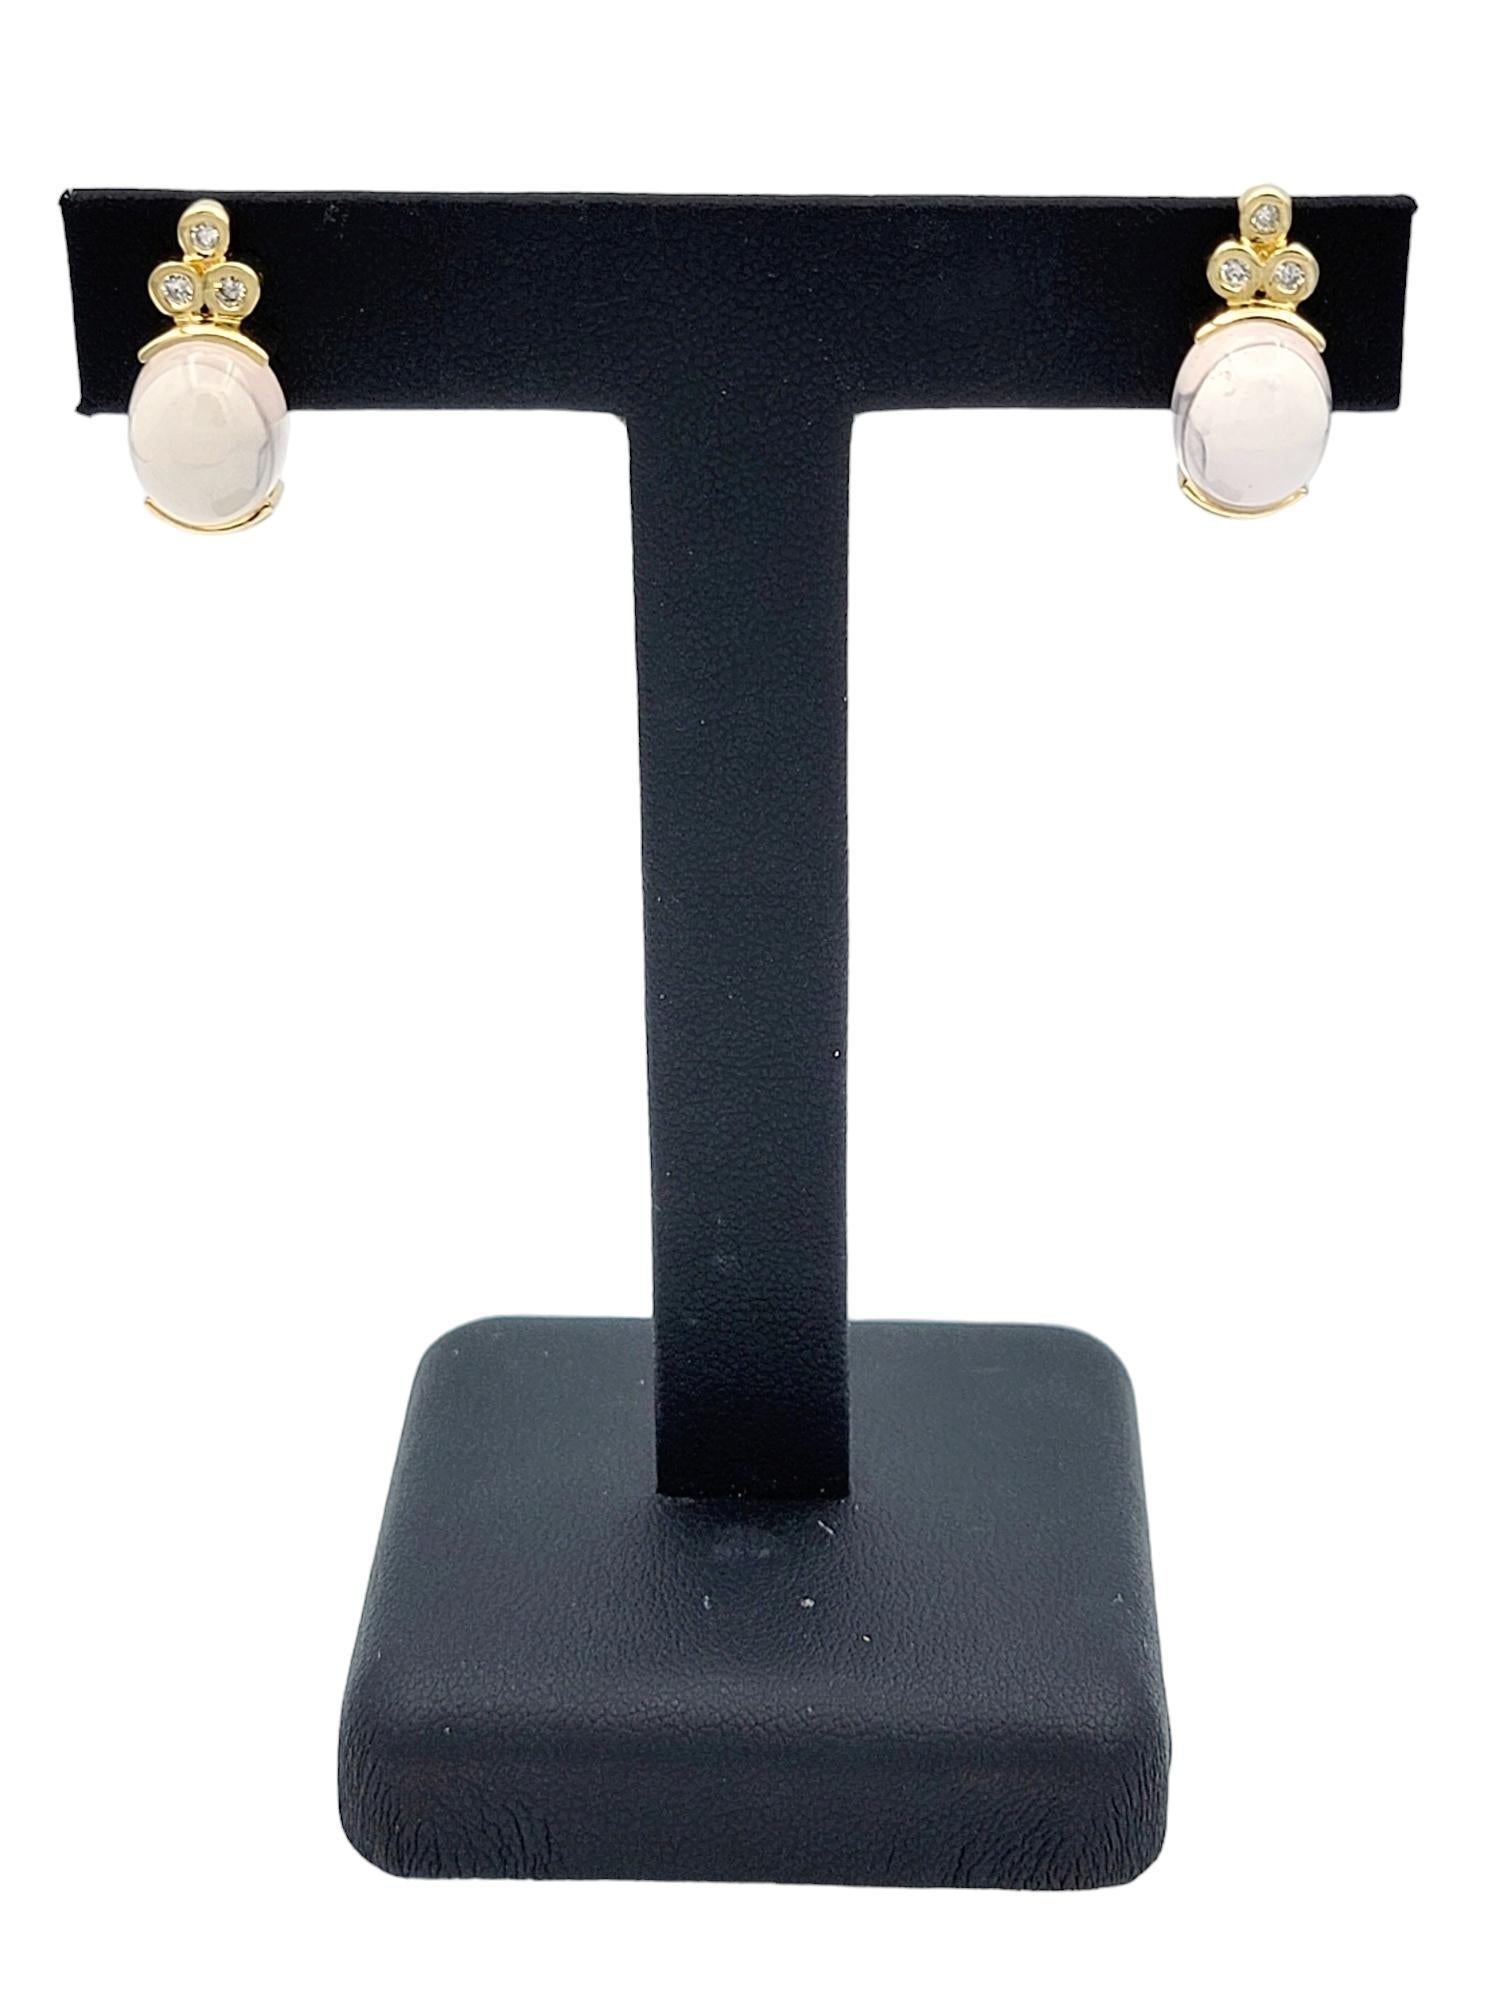 Cabochon Rose Quartz and Round Diamond Stud Earrings Set in 14 Karat Yellow Gold For Sale 2